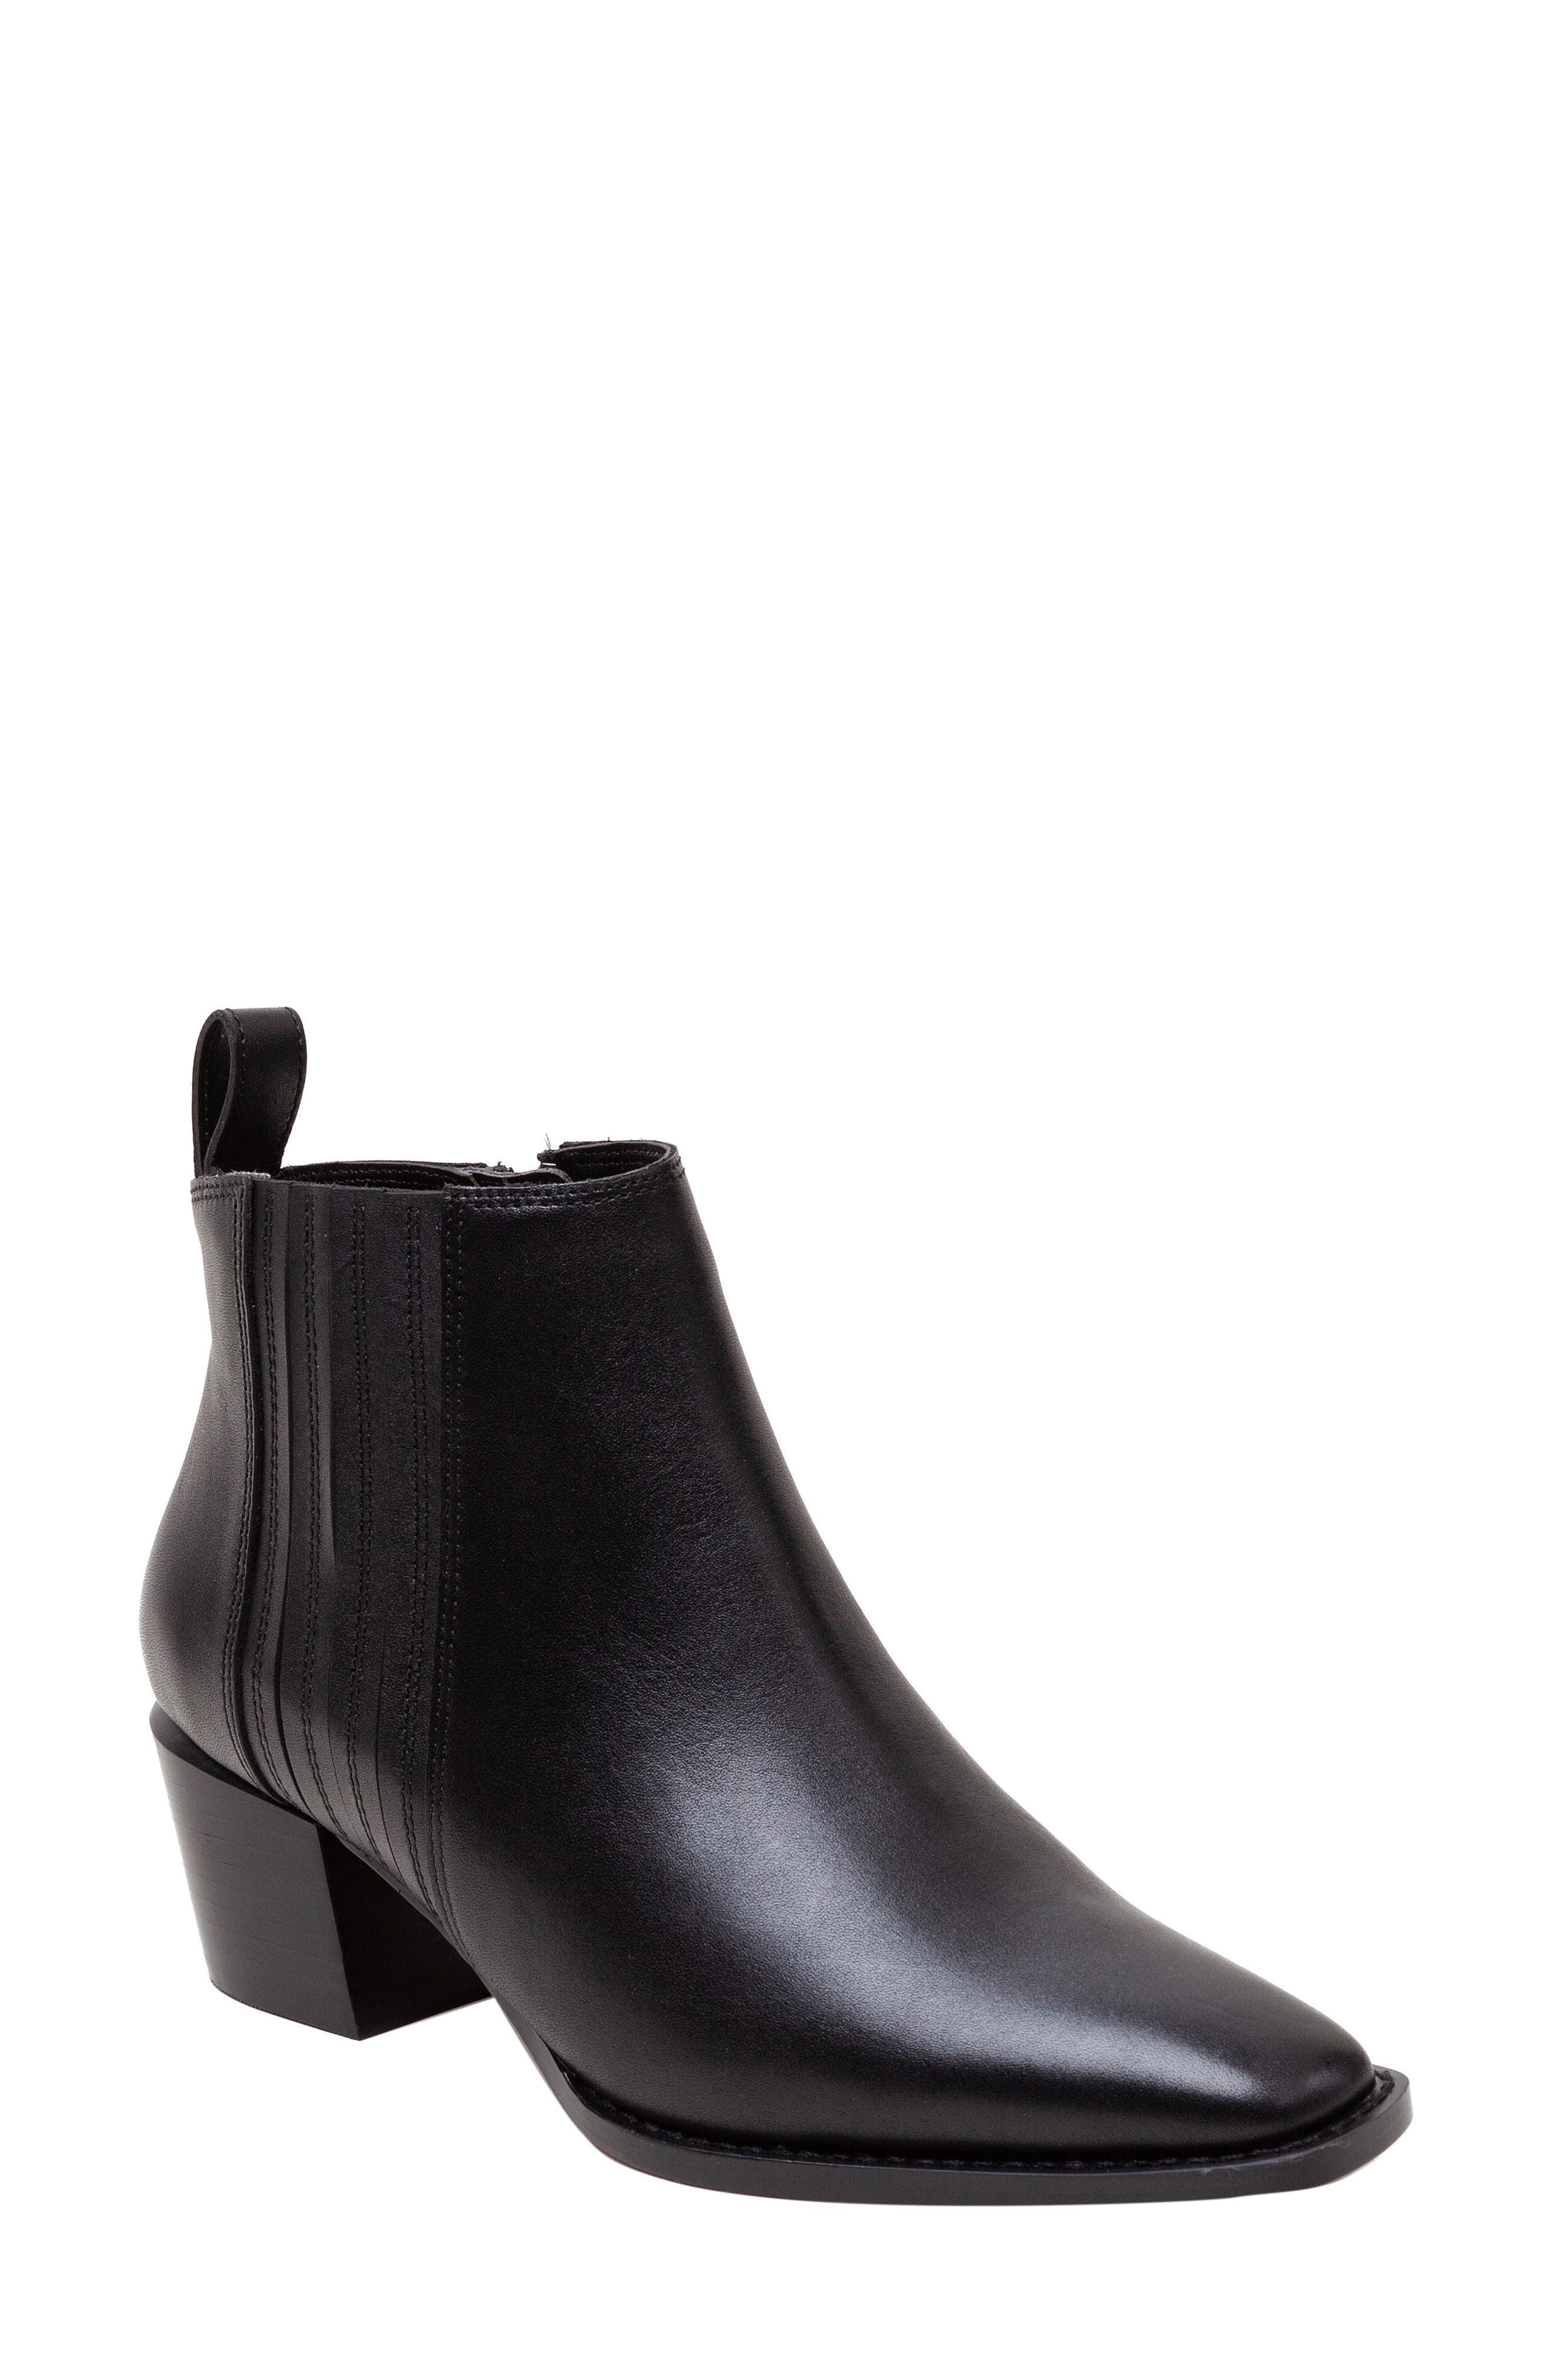 Women's Square Toe Ankle Boots u0026 Booties | Nordstrom